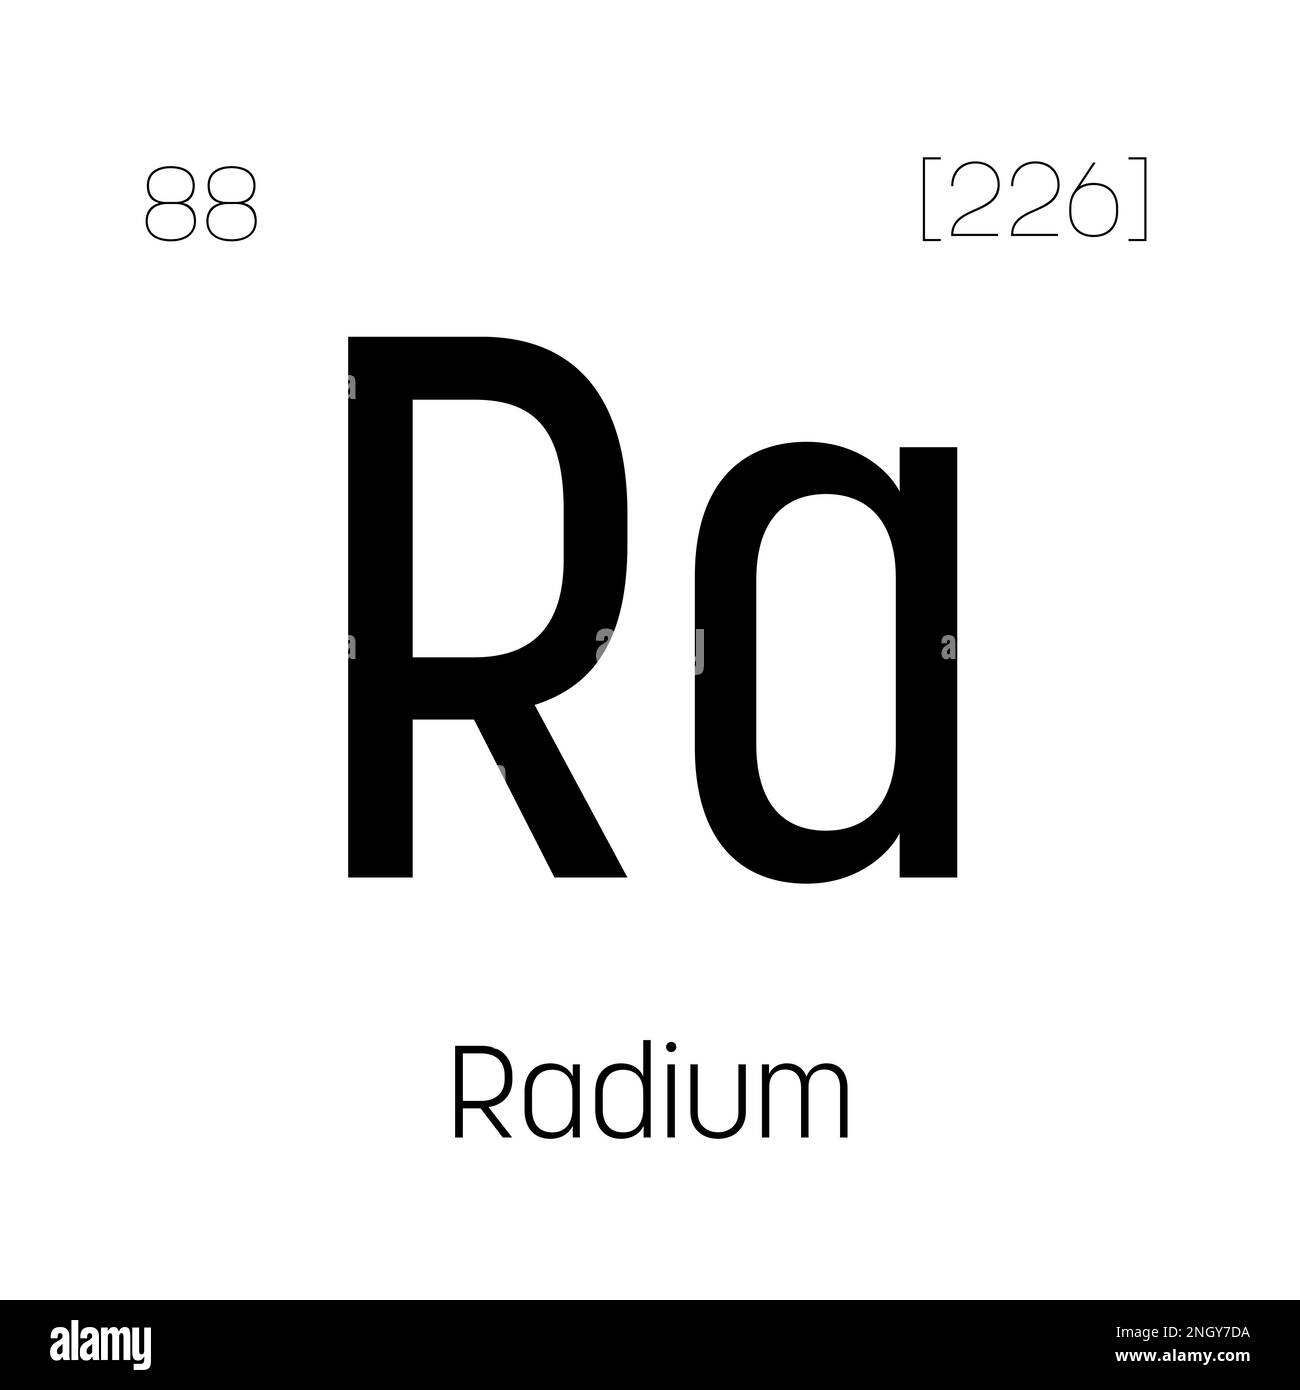 Radium, Ra, periodic table element with name, symbol, atomic number and weight. Alkaline earth metal with radioactive properties, formerly used in medical therapy and as a component of certain types of paint. Stock Vector